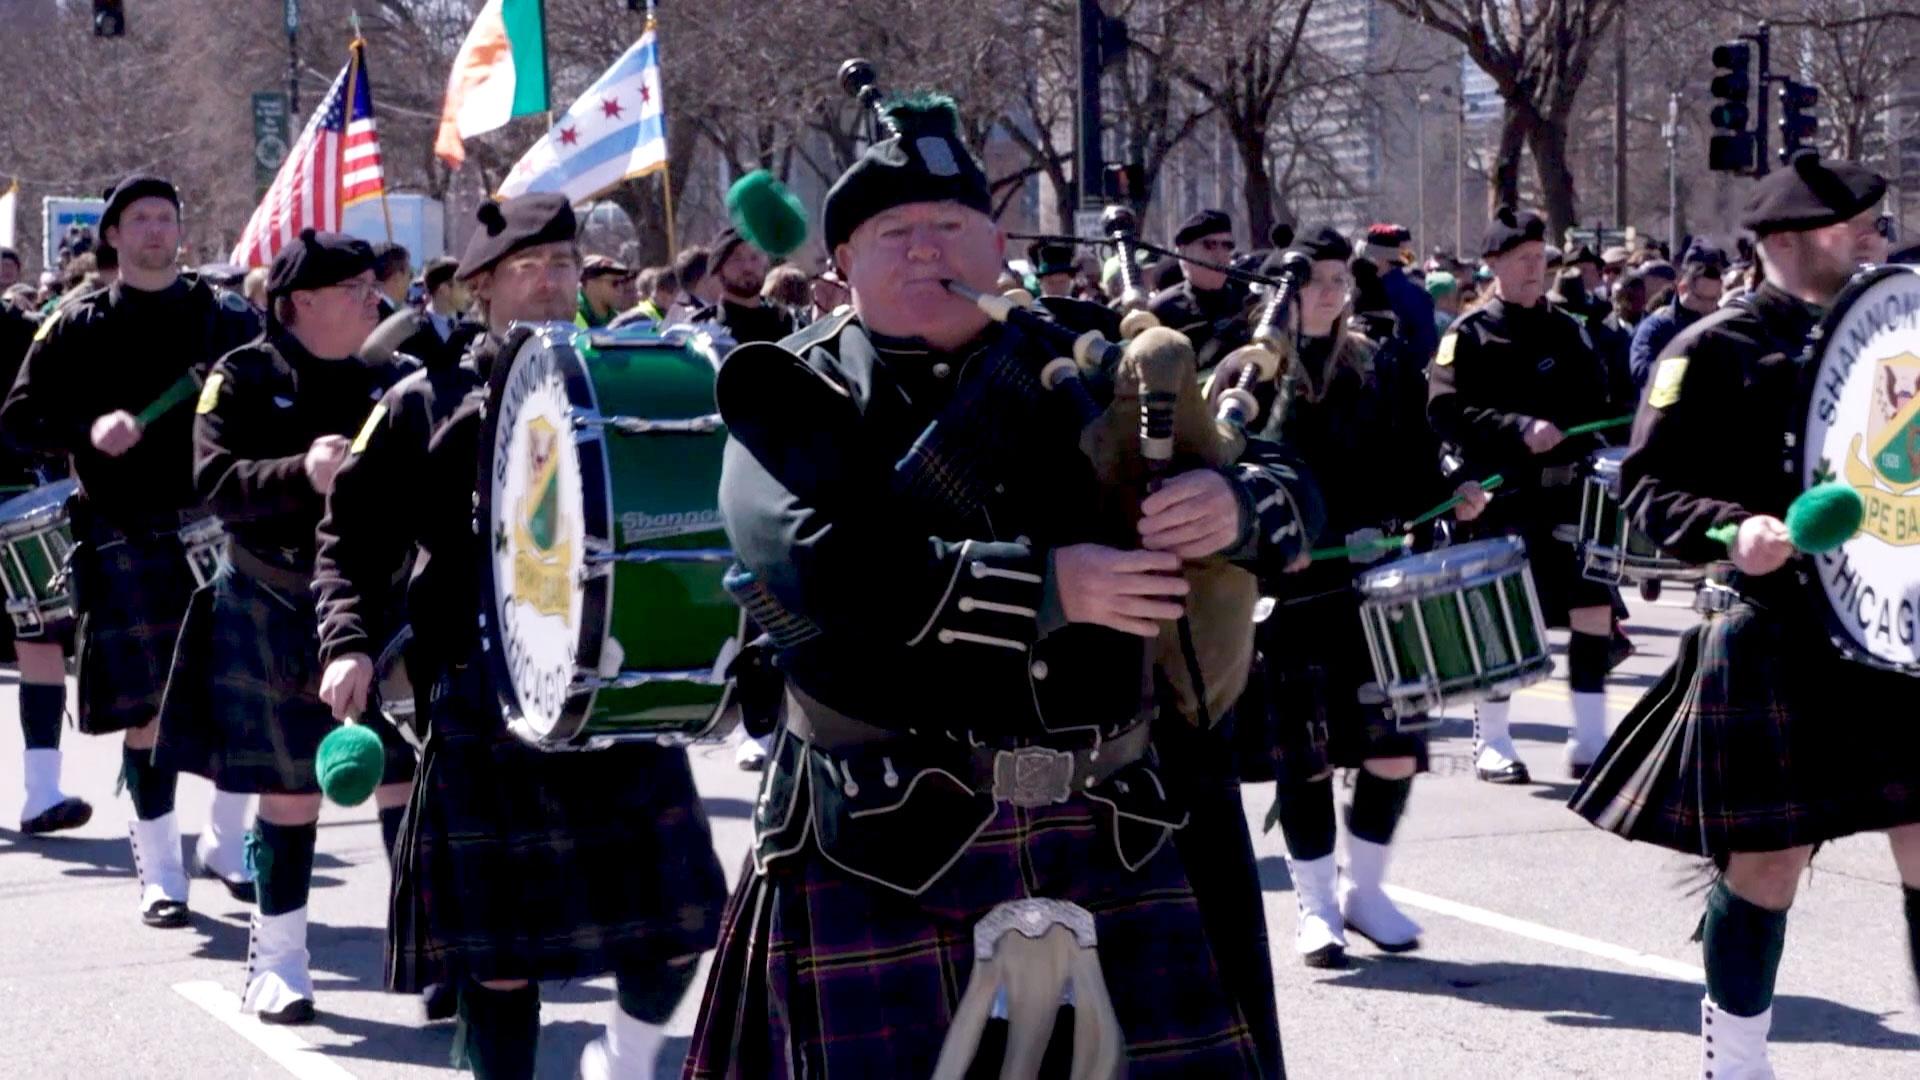 Chicago, Illinois, USA - March 16, 2019: St. Patrick's Day Parade